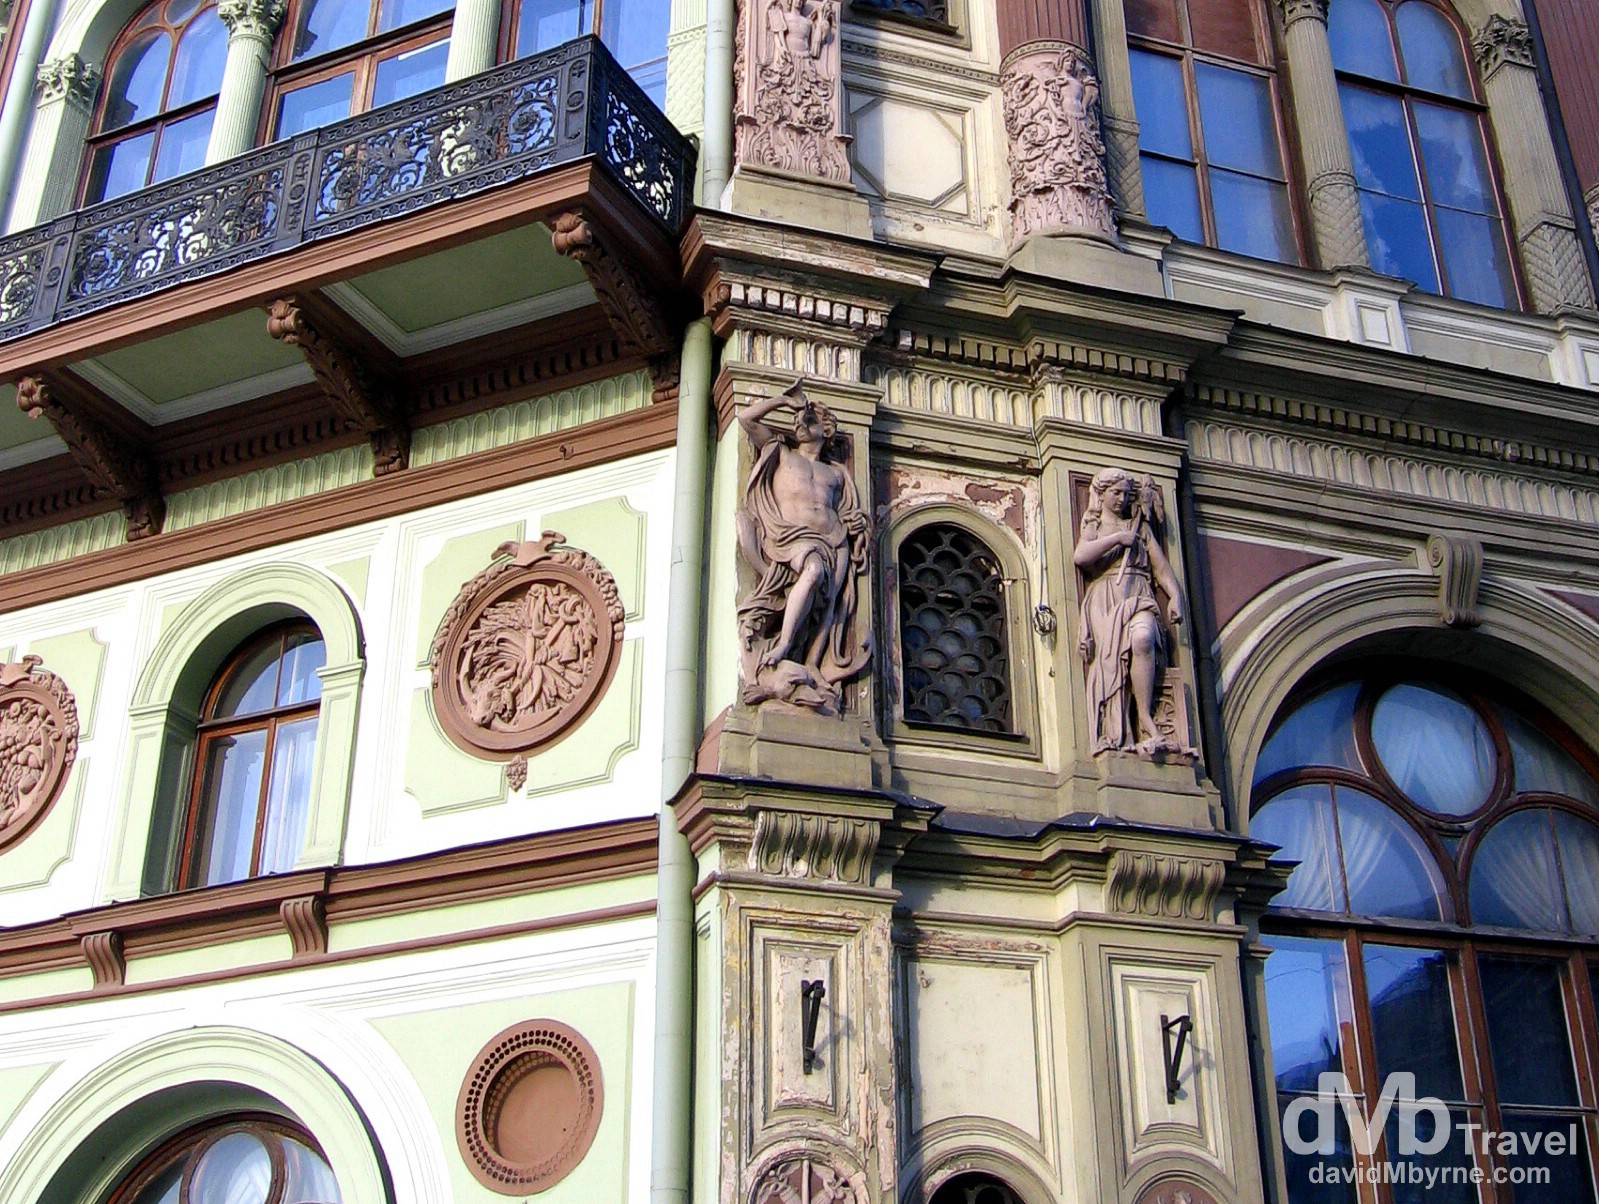 Art Nouveau architecture in the Old Town of Riga, Latvia. March 3, 2006.